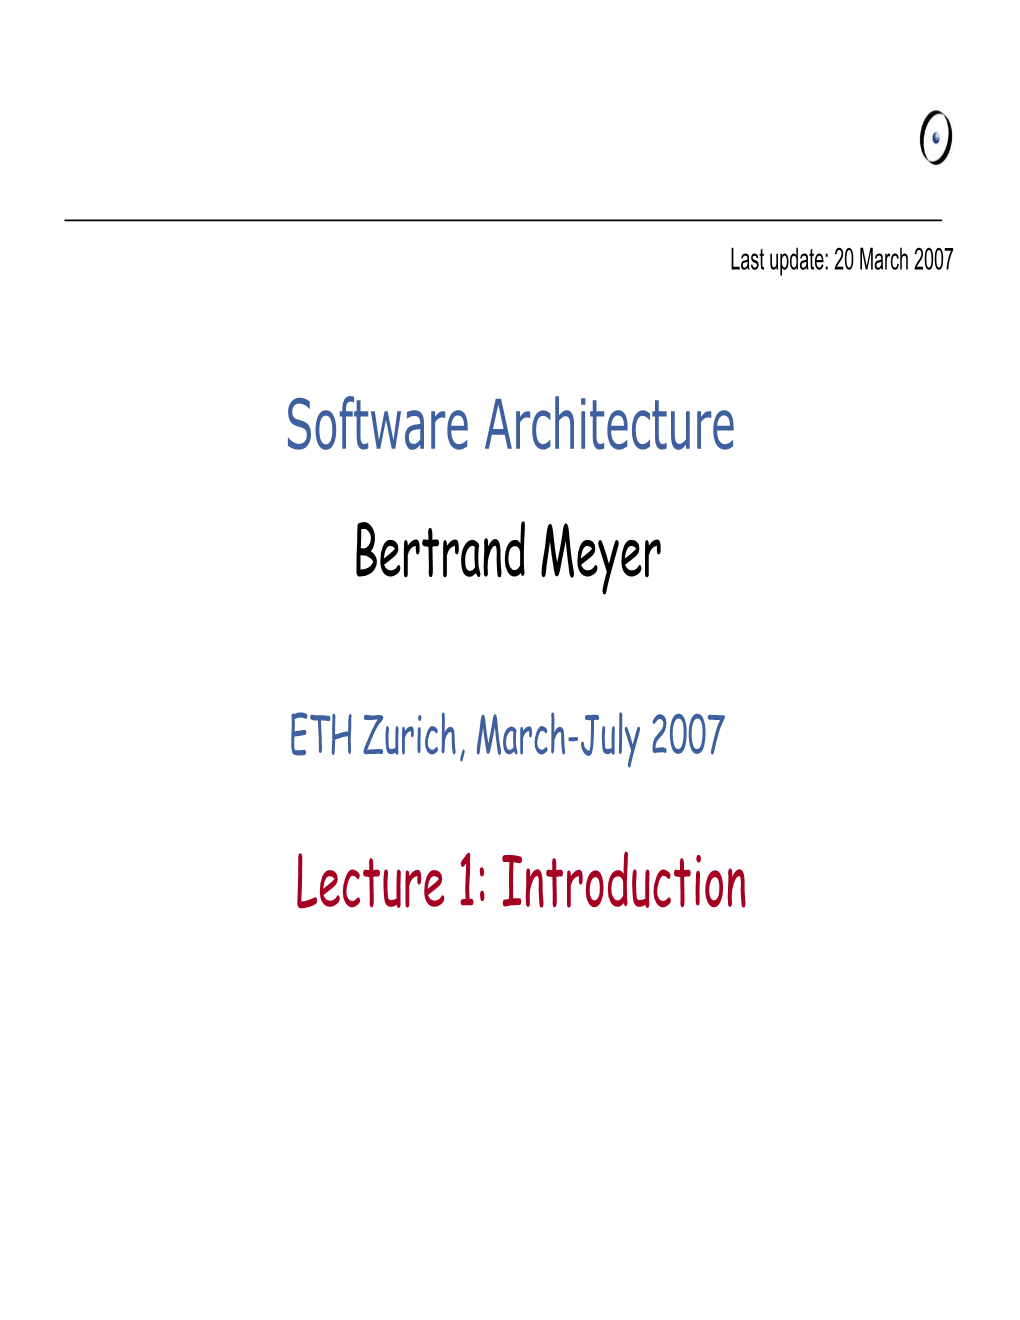 Software Architecture Bertrand Meyer Lecture 1